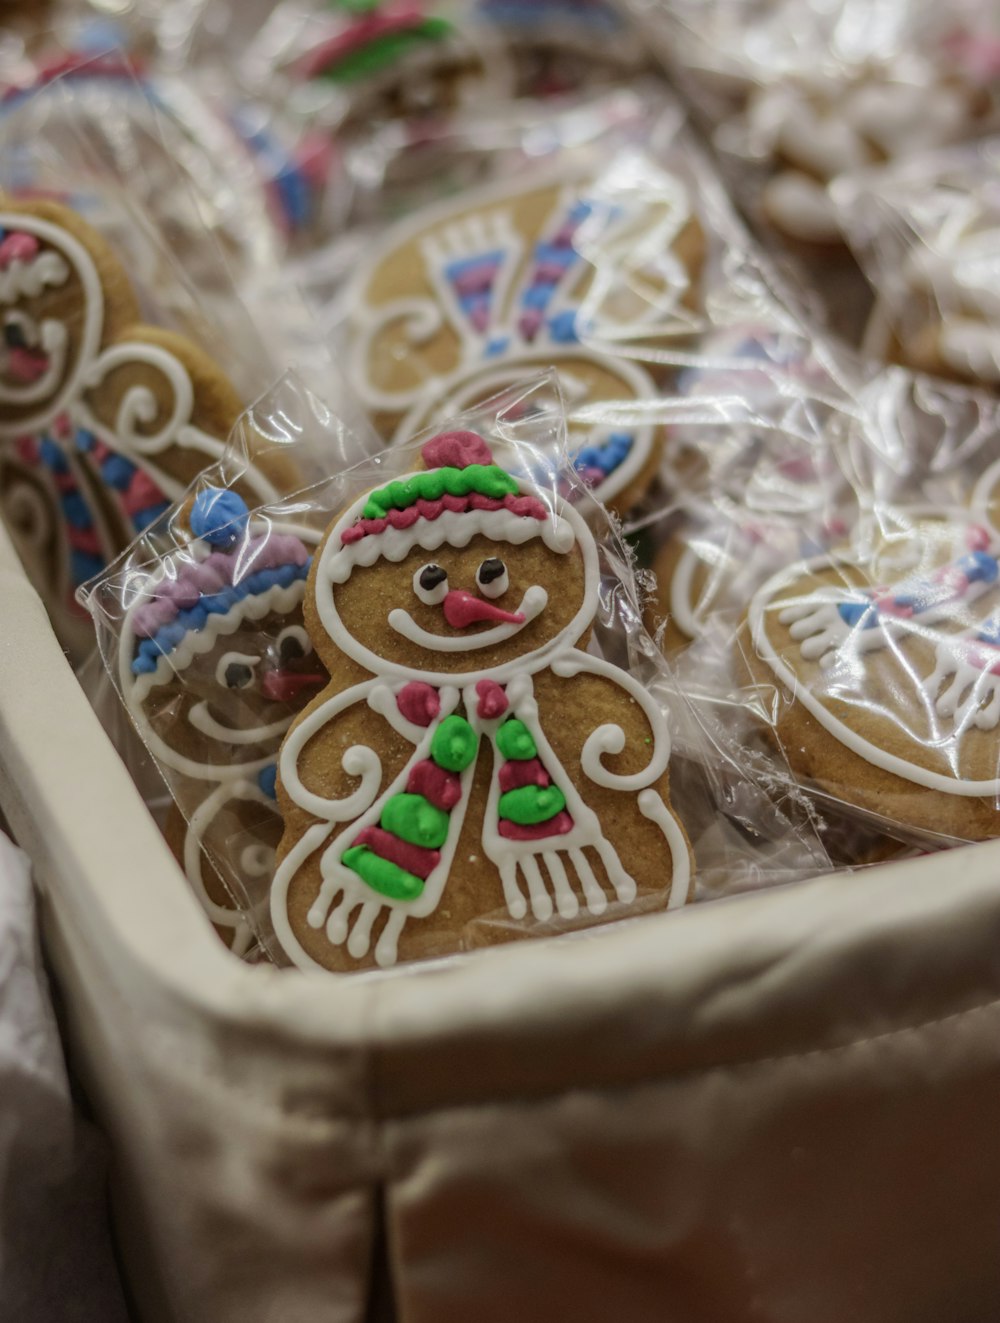 a tray of decorated cookies in plastic wrappers